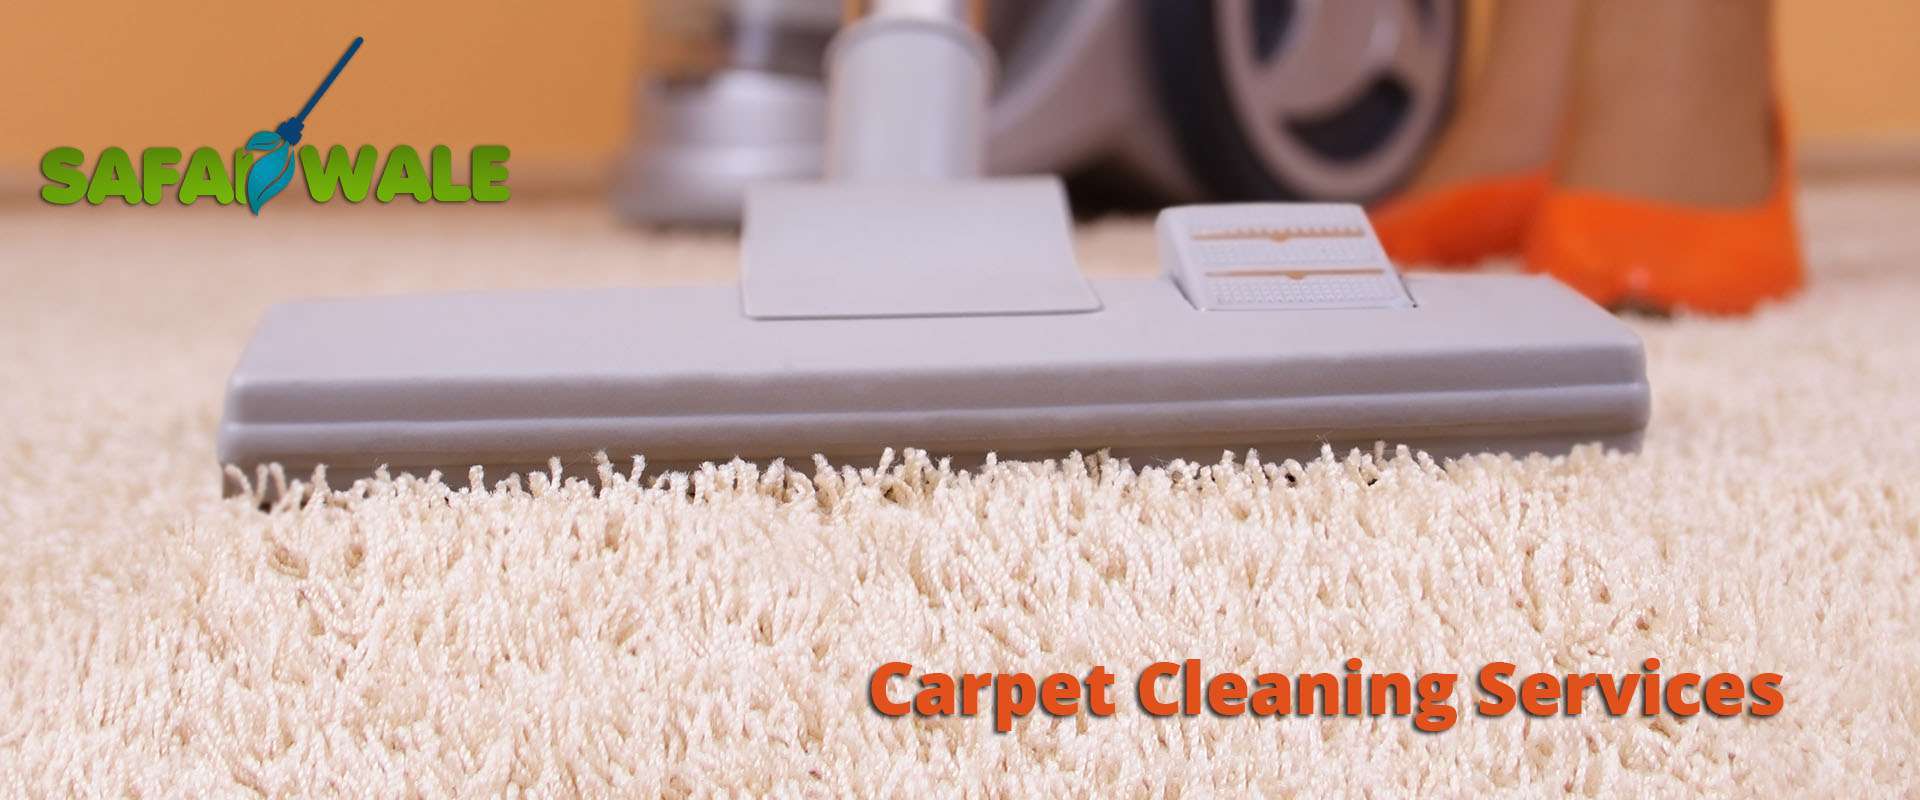 carpet cleaning services in Surat